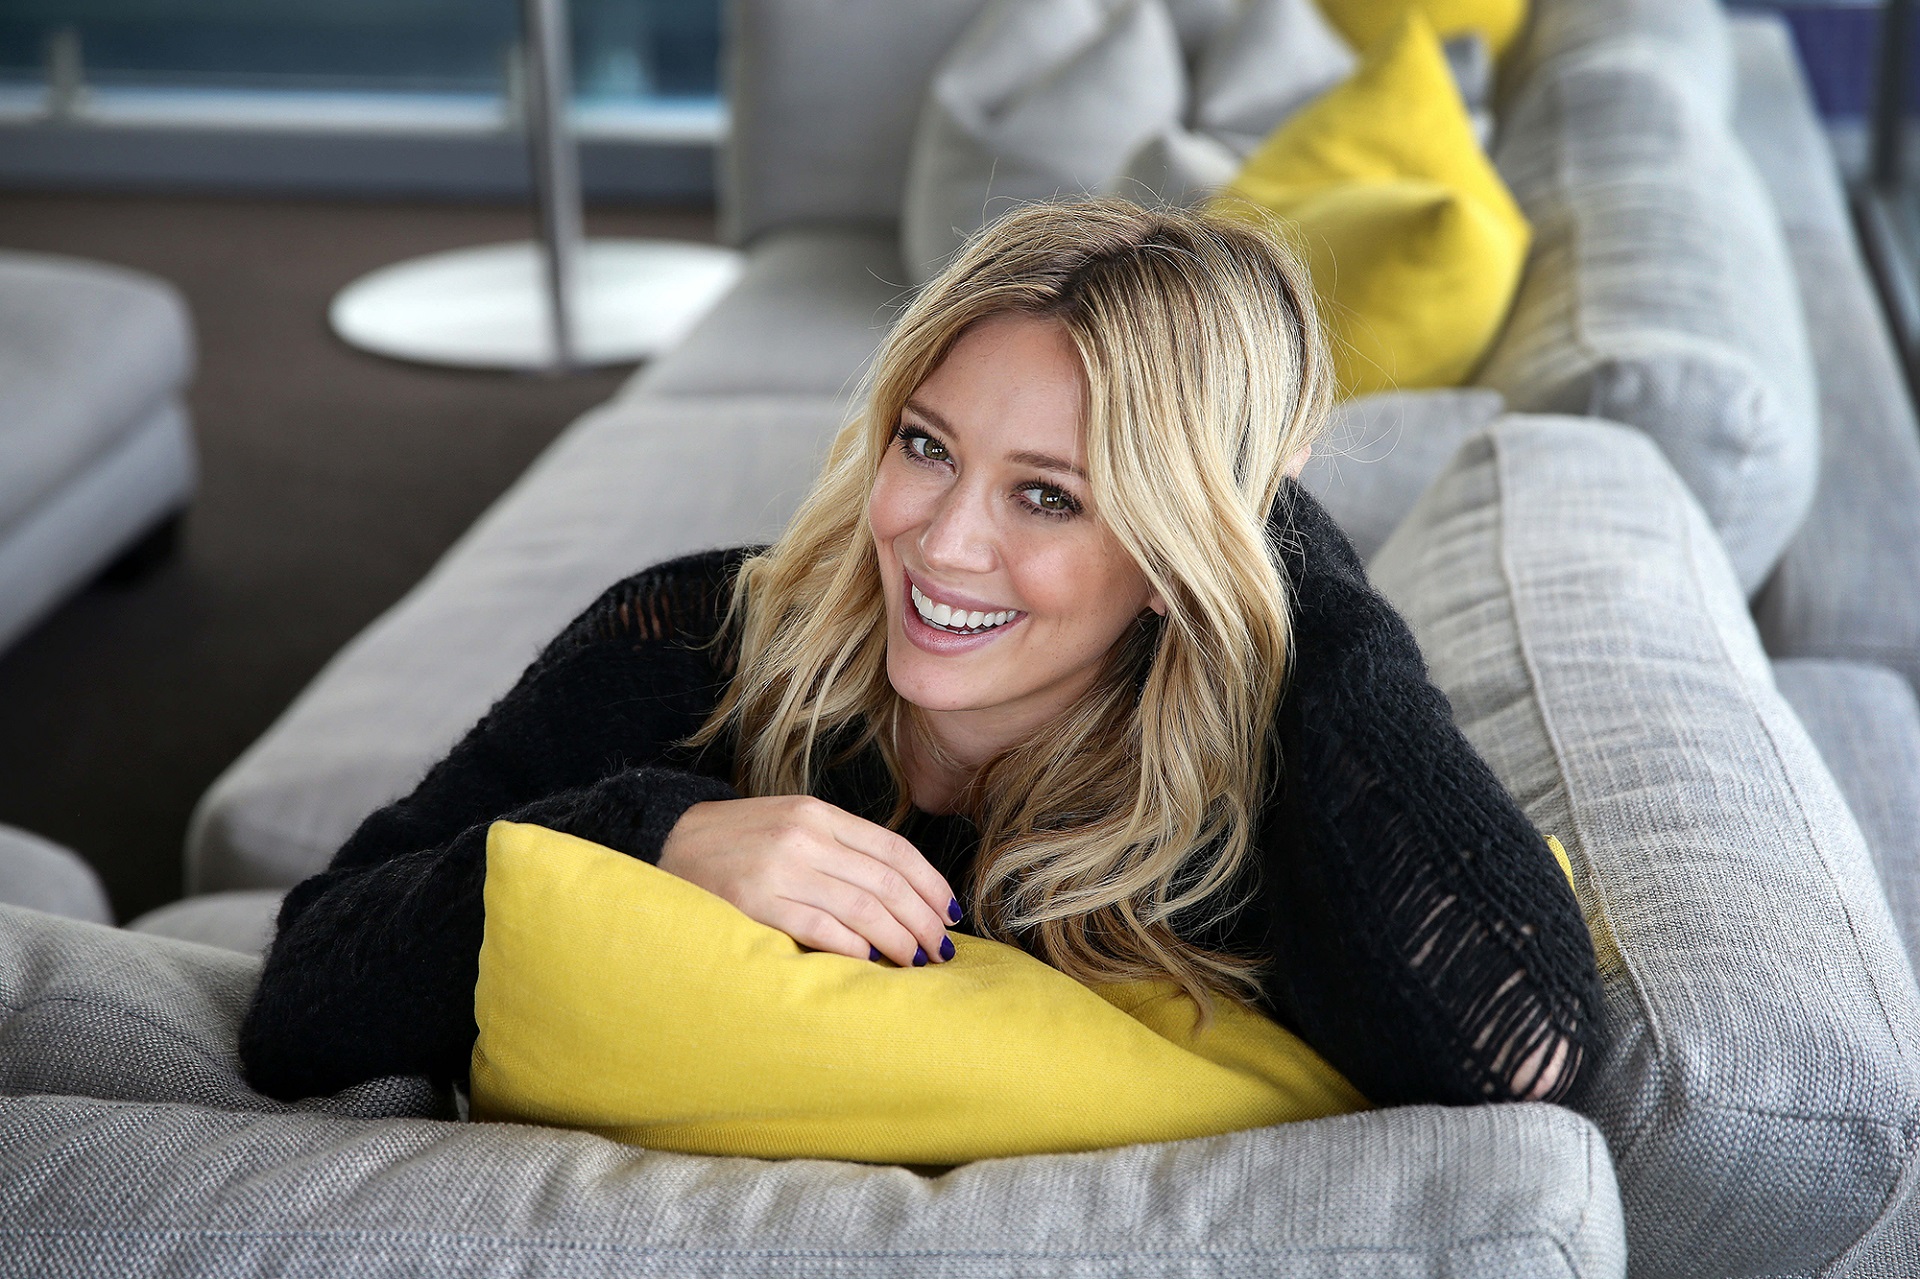 hilary duff wallpaper background wallpapers